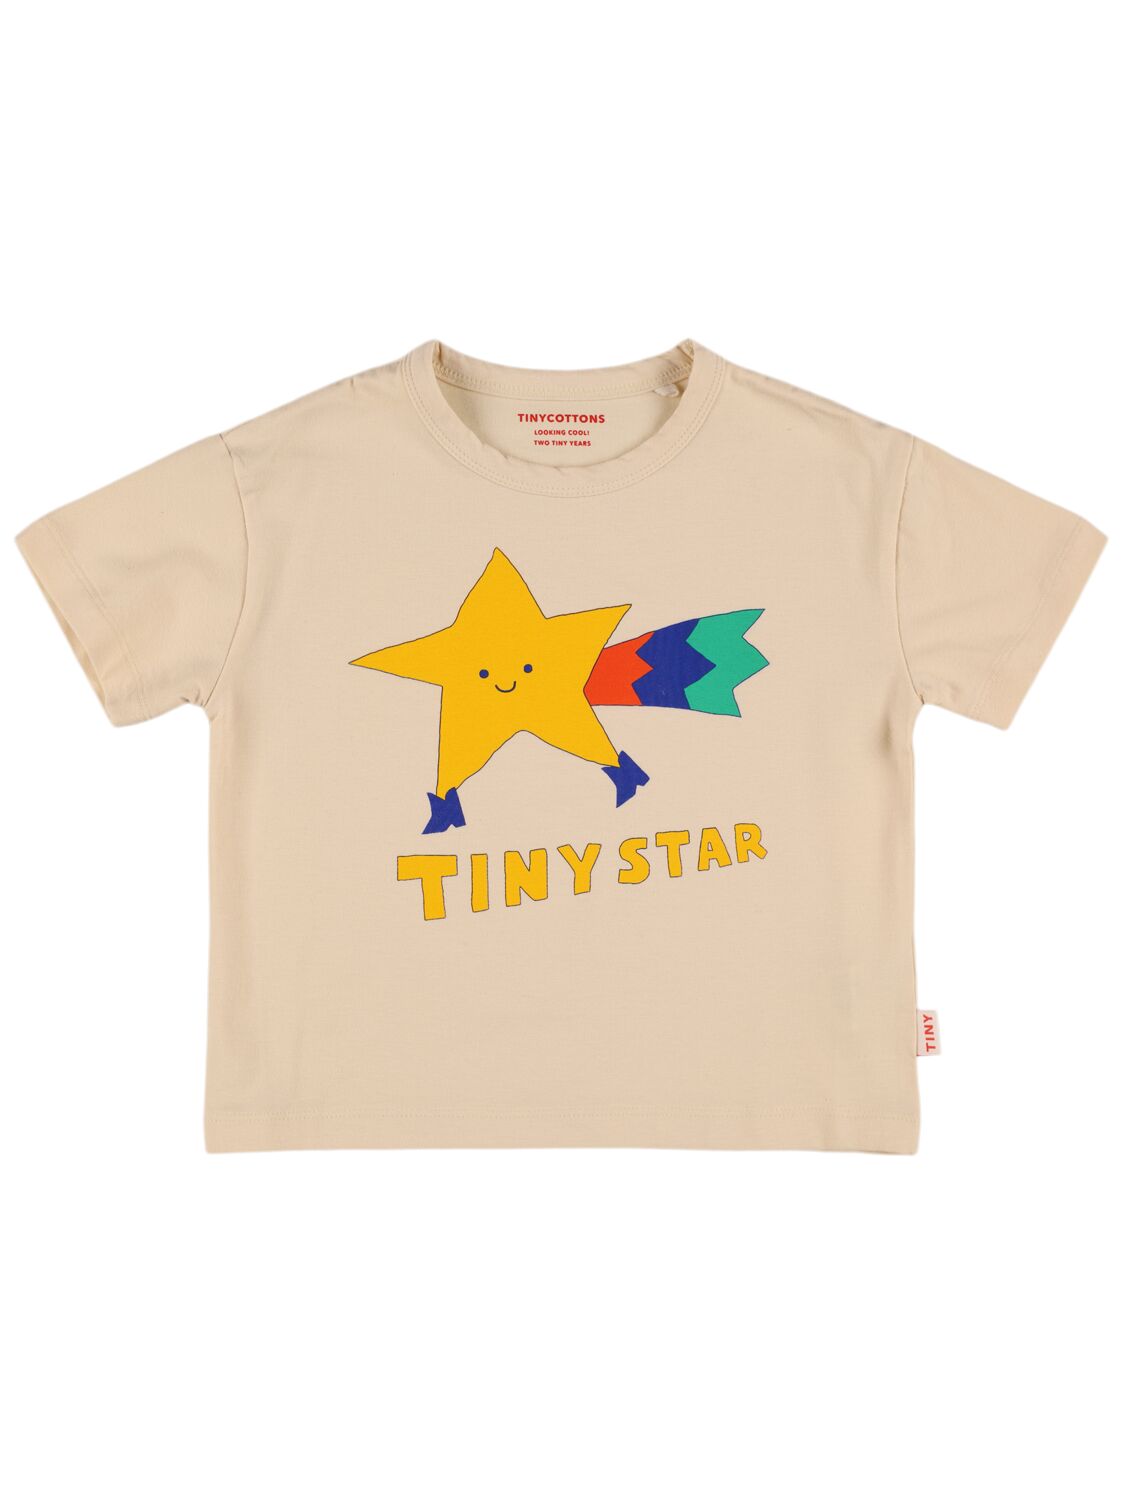 Tiny Cottons Kids' Printed Organic Cotton T-shirt In Gold